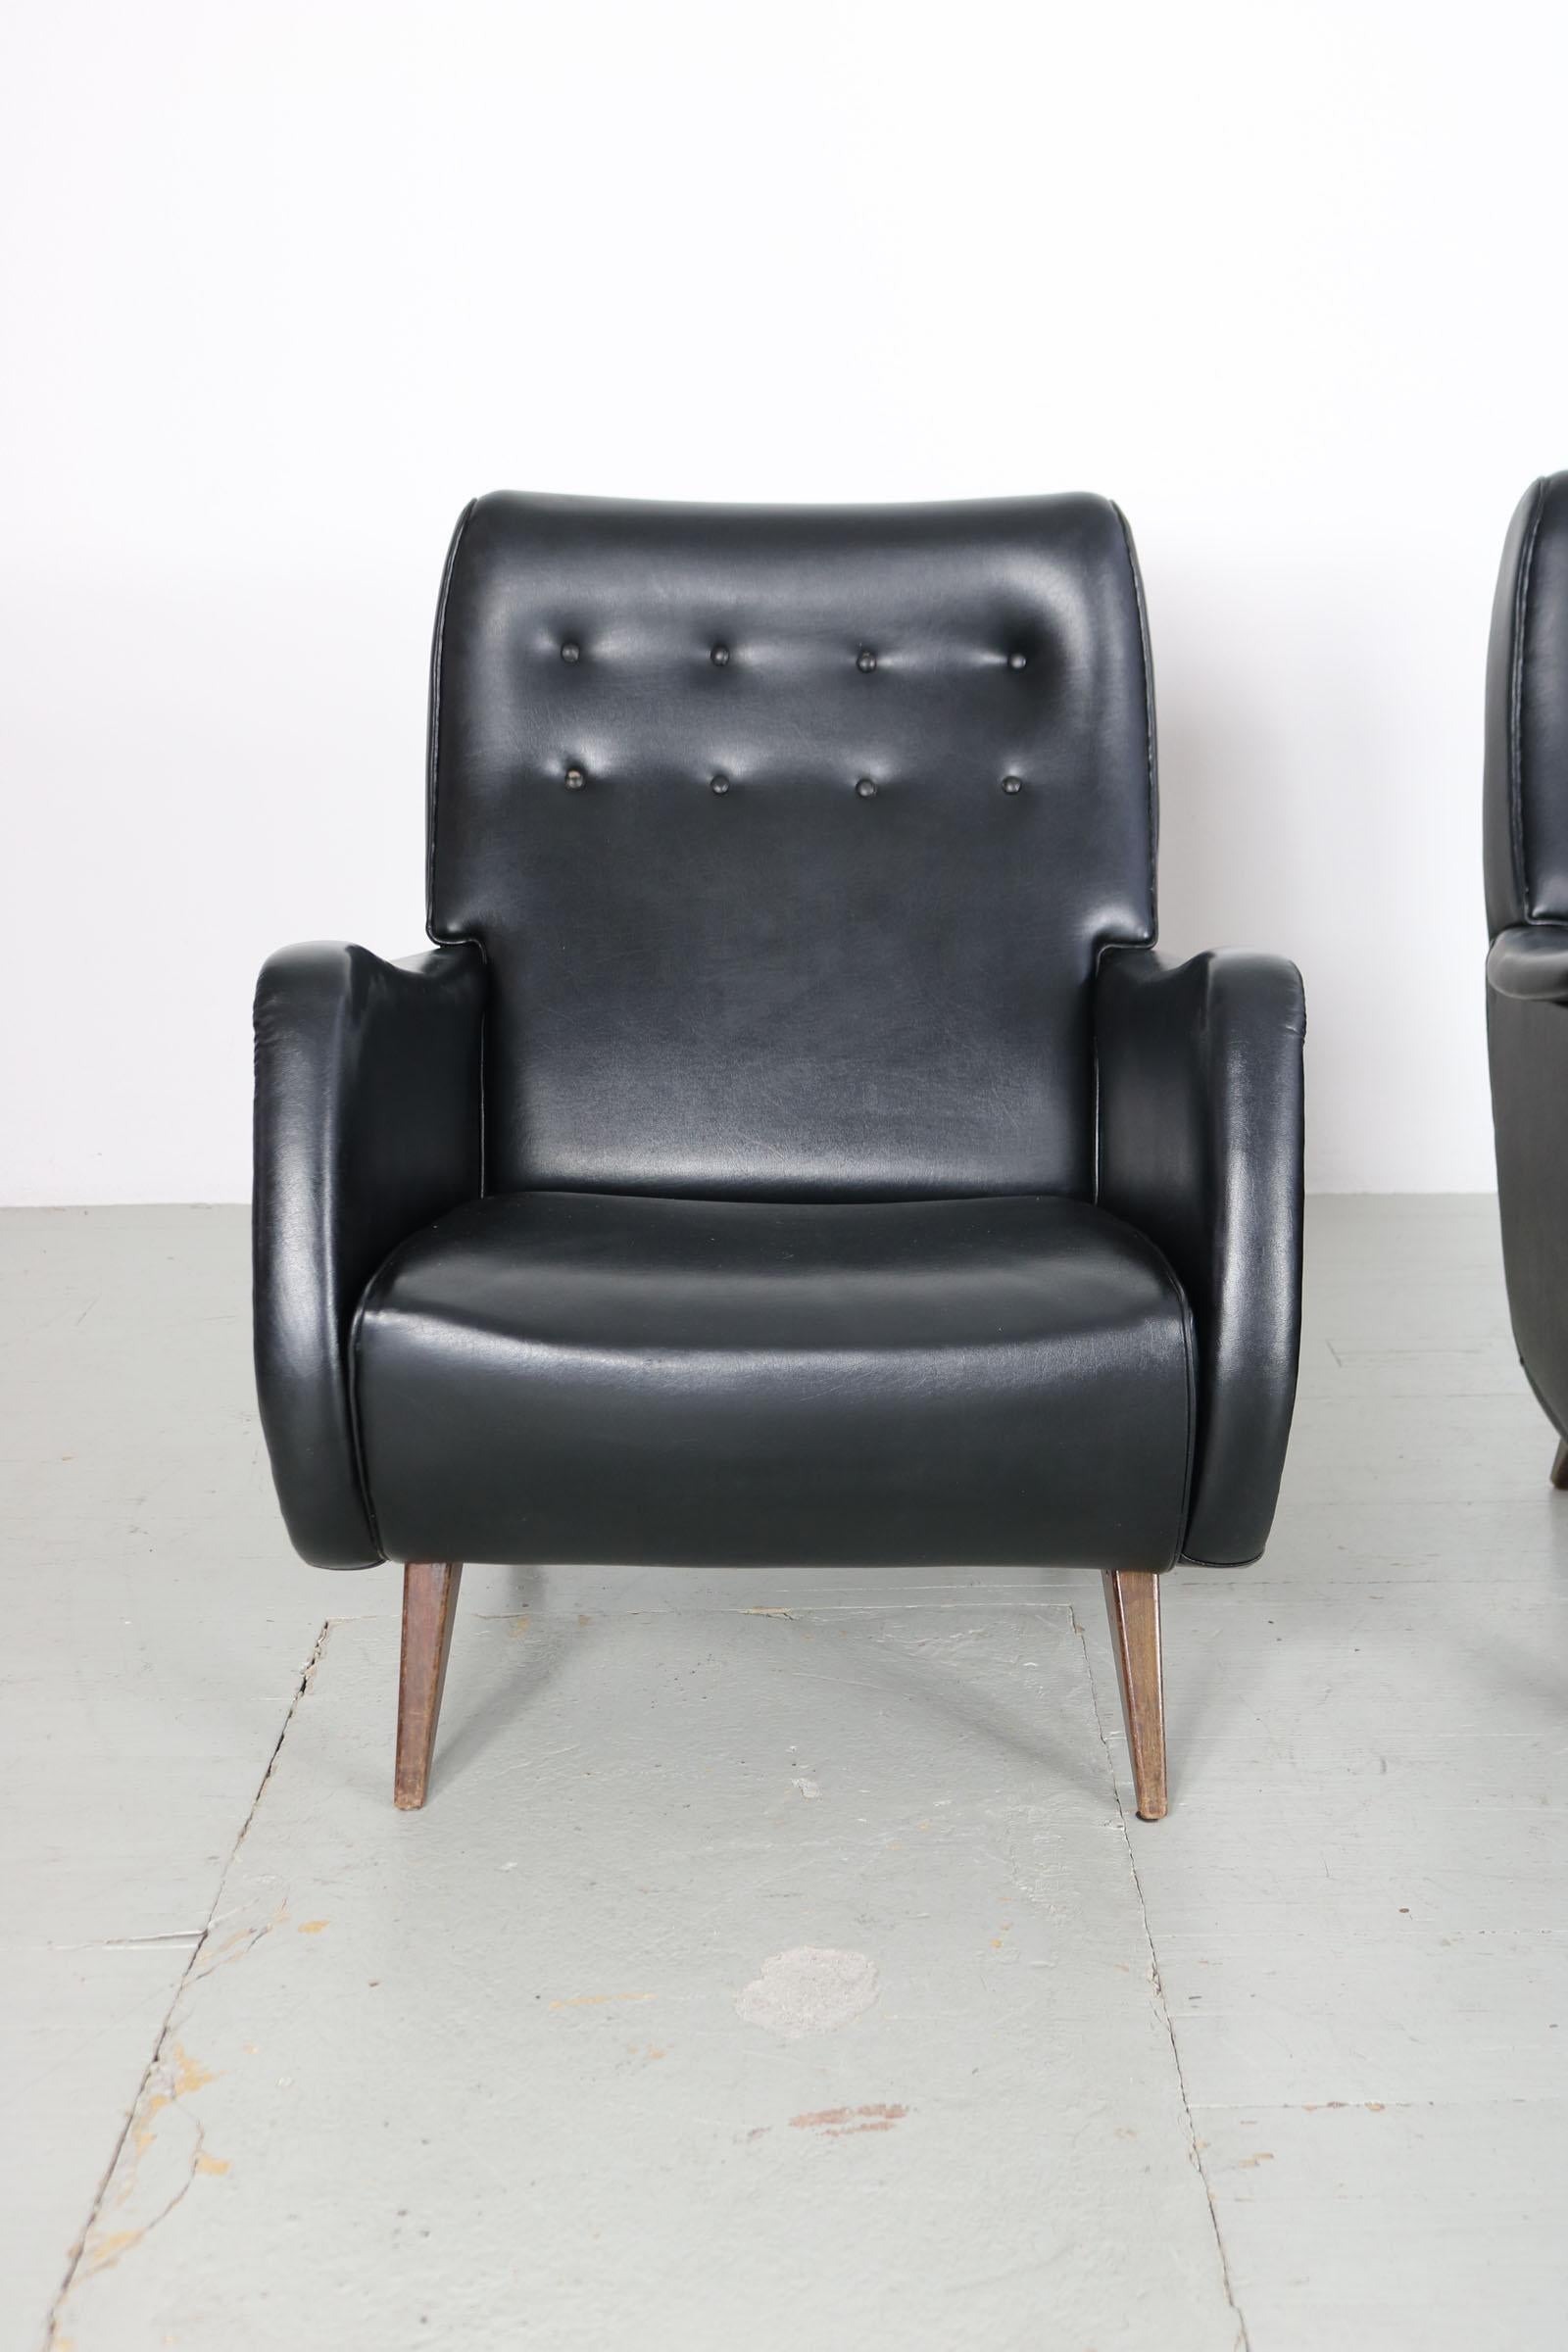 Set of Two Italian Armchairs in Original Black Leatherette Upholstery, 1950s For Sale 6